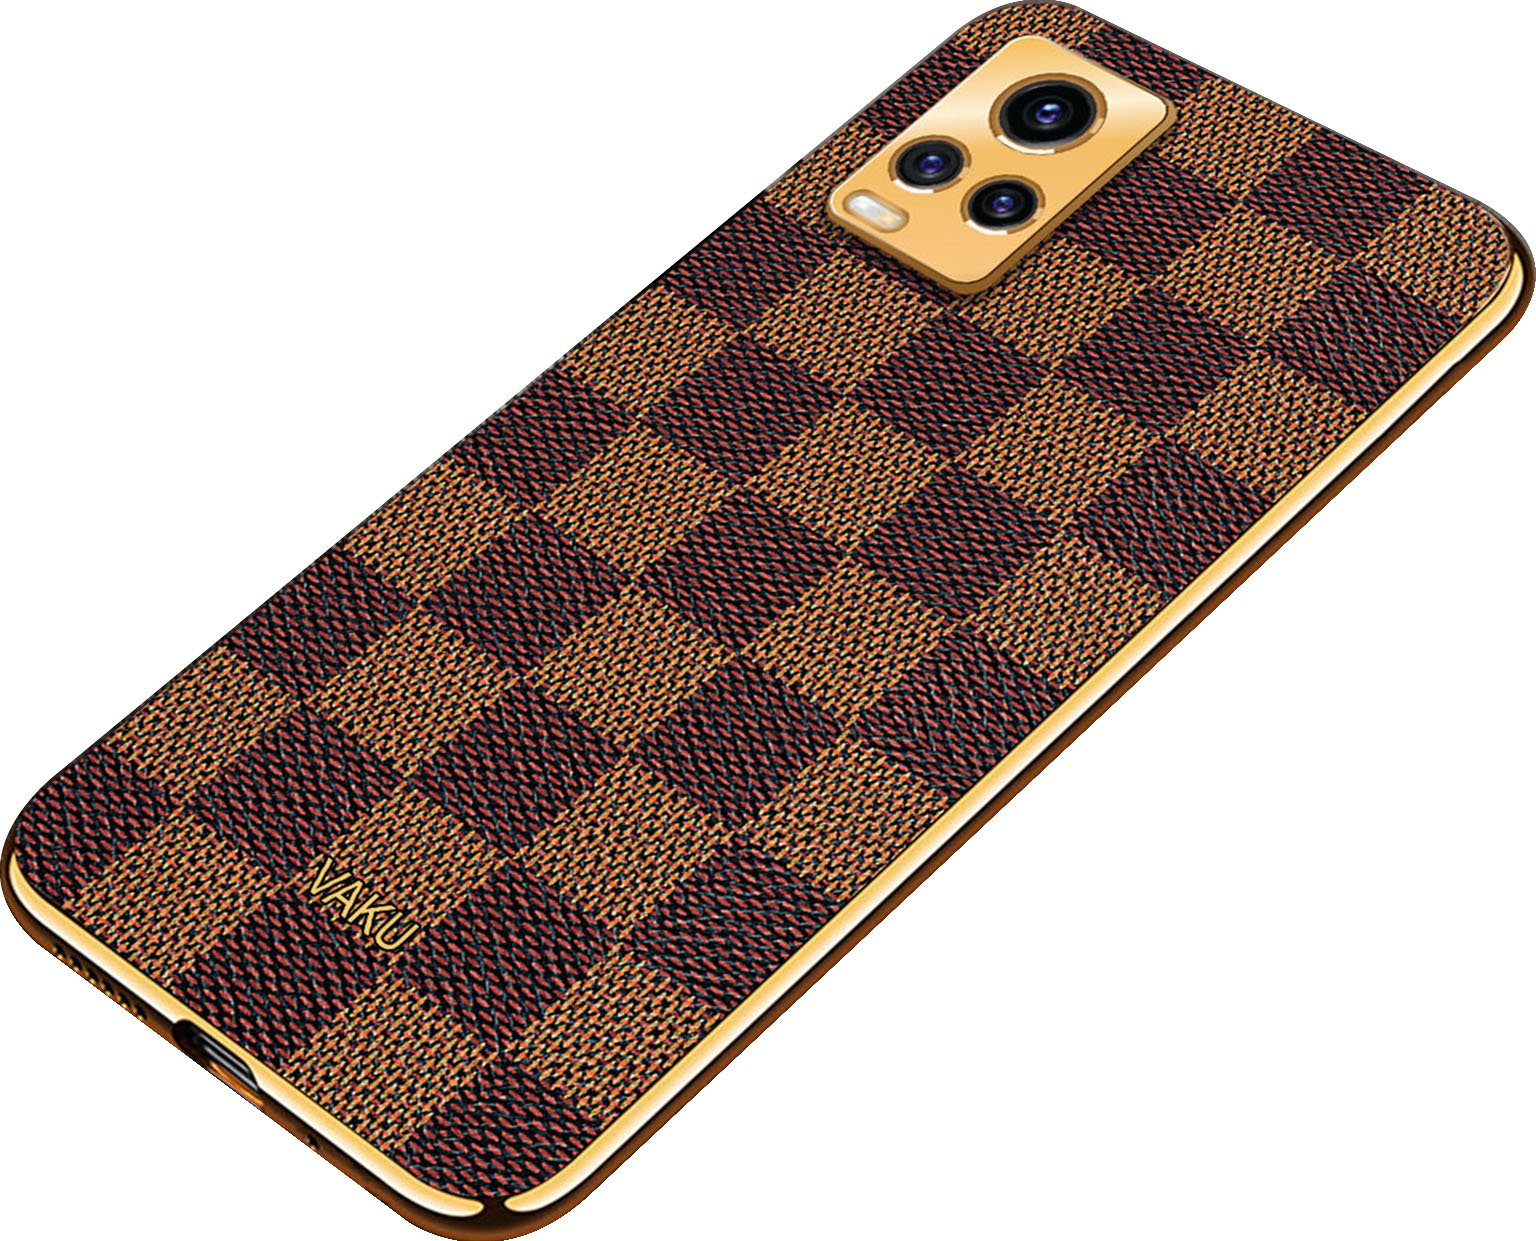 Luxury Leather Canvas Apple iPhone Samsung Galaxy Case  Samsung galaxy case,  Louis vuitton, Leather cell phone cases